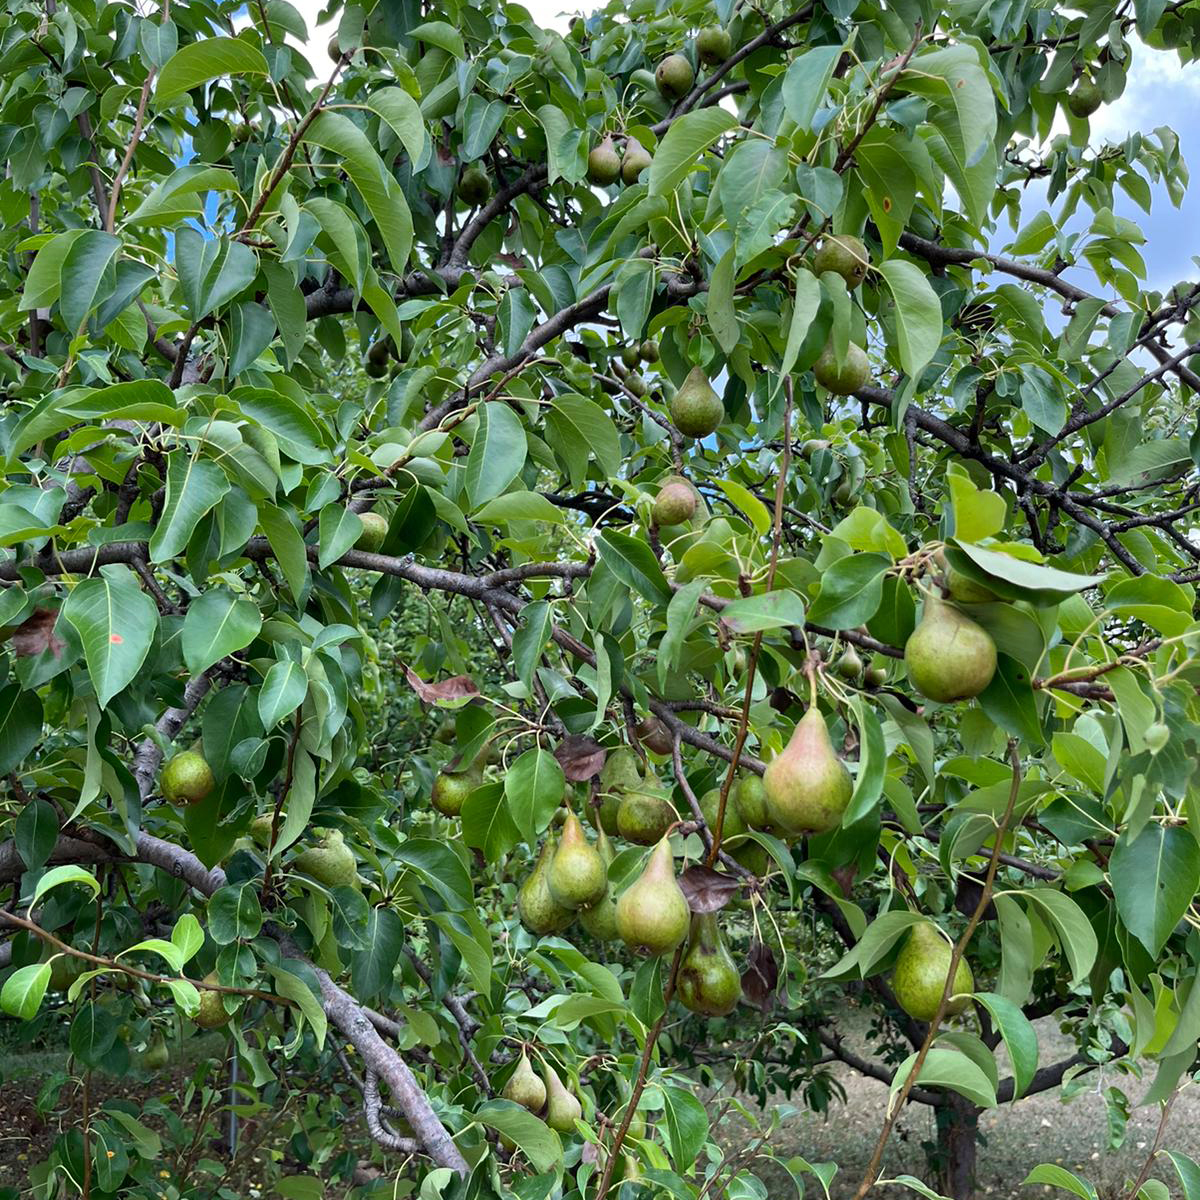 Pears growing on the tree